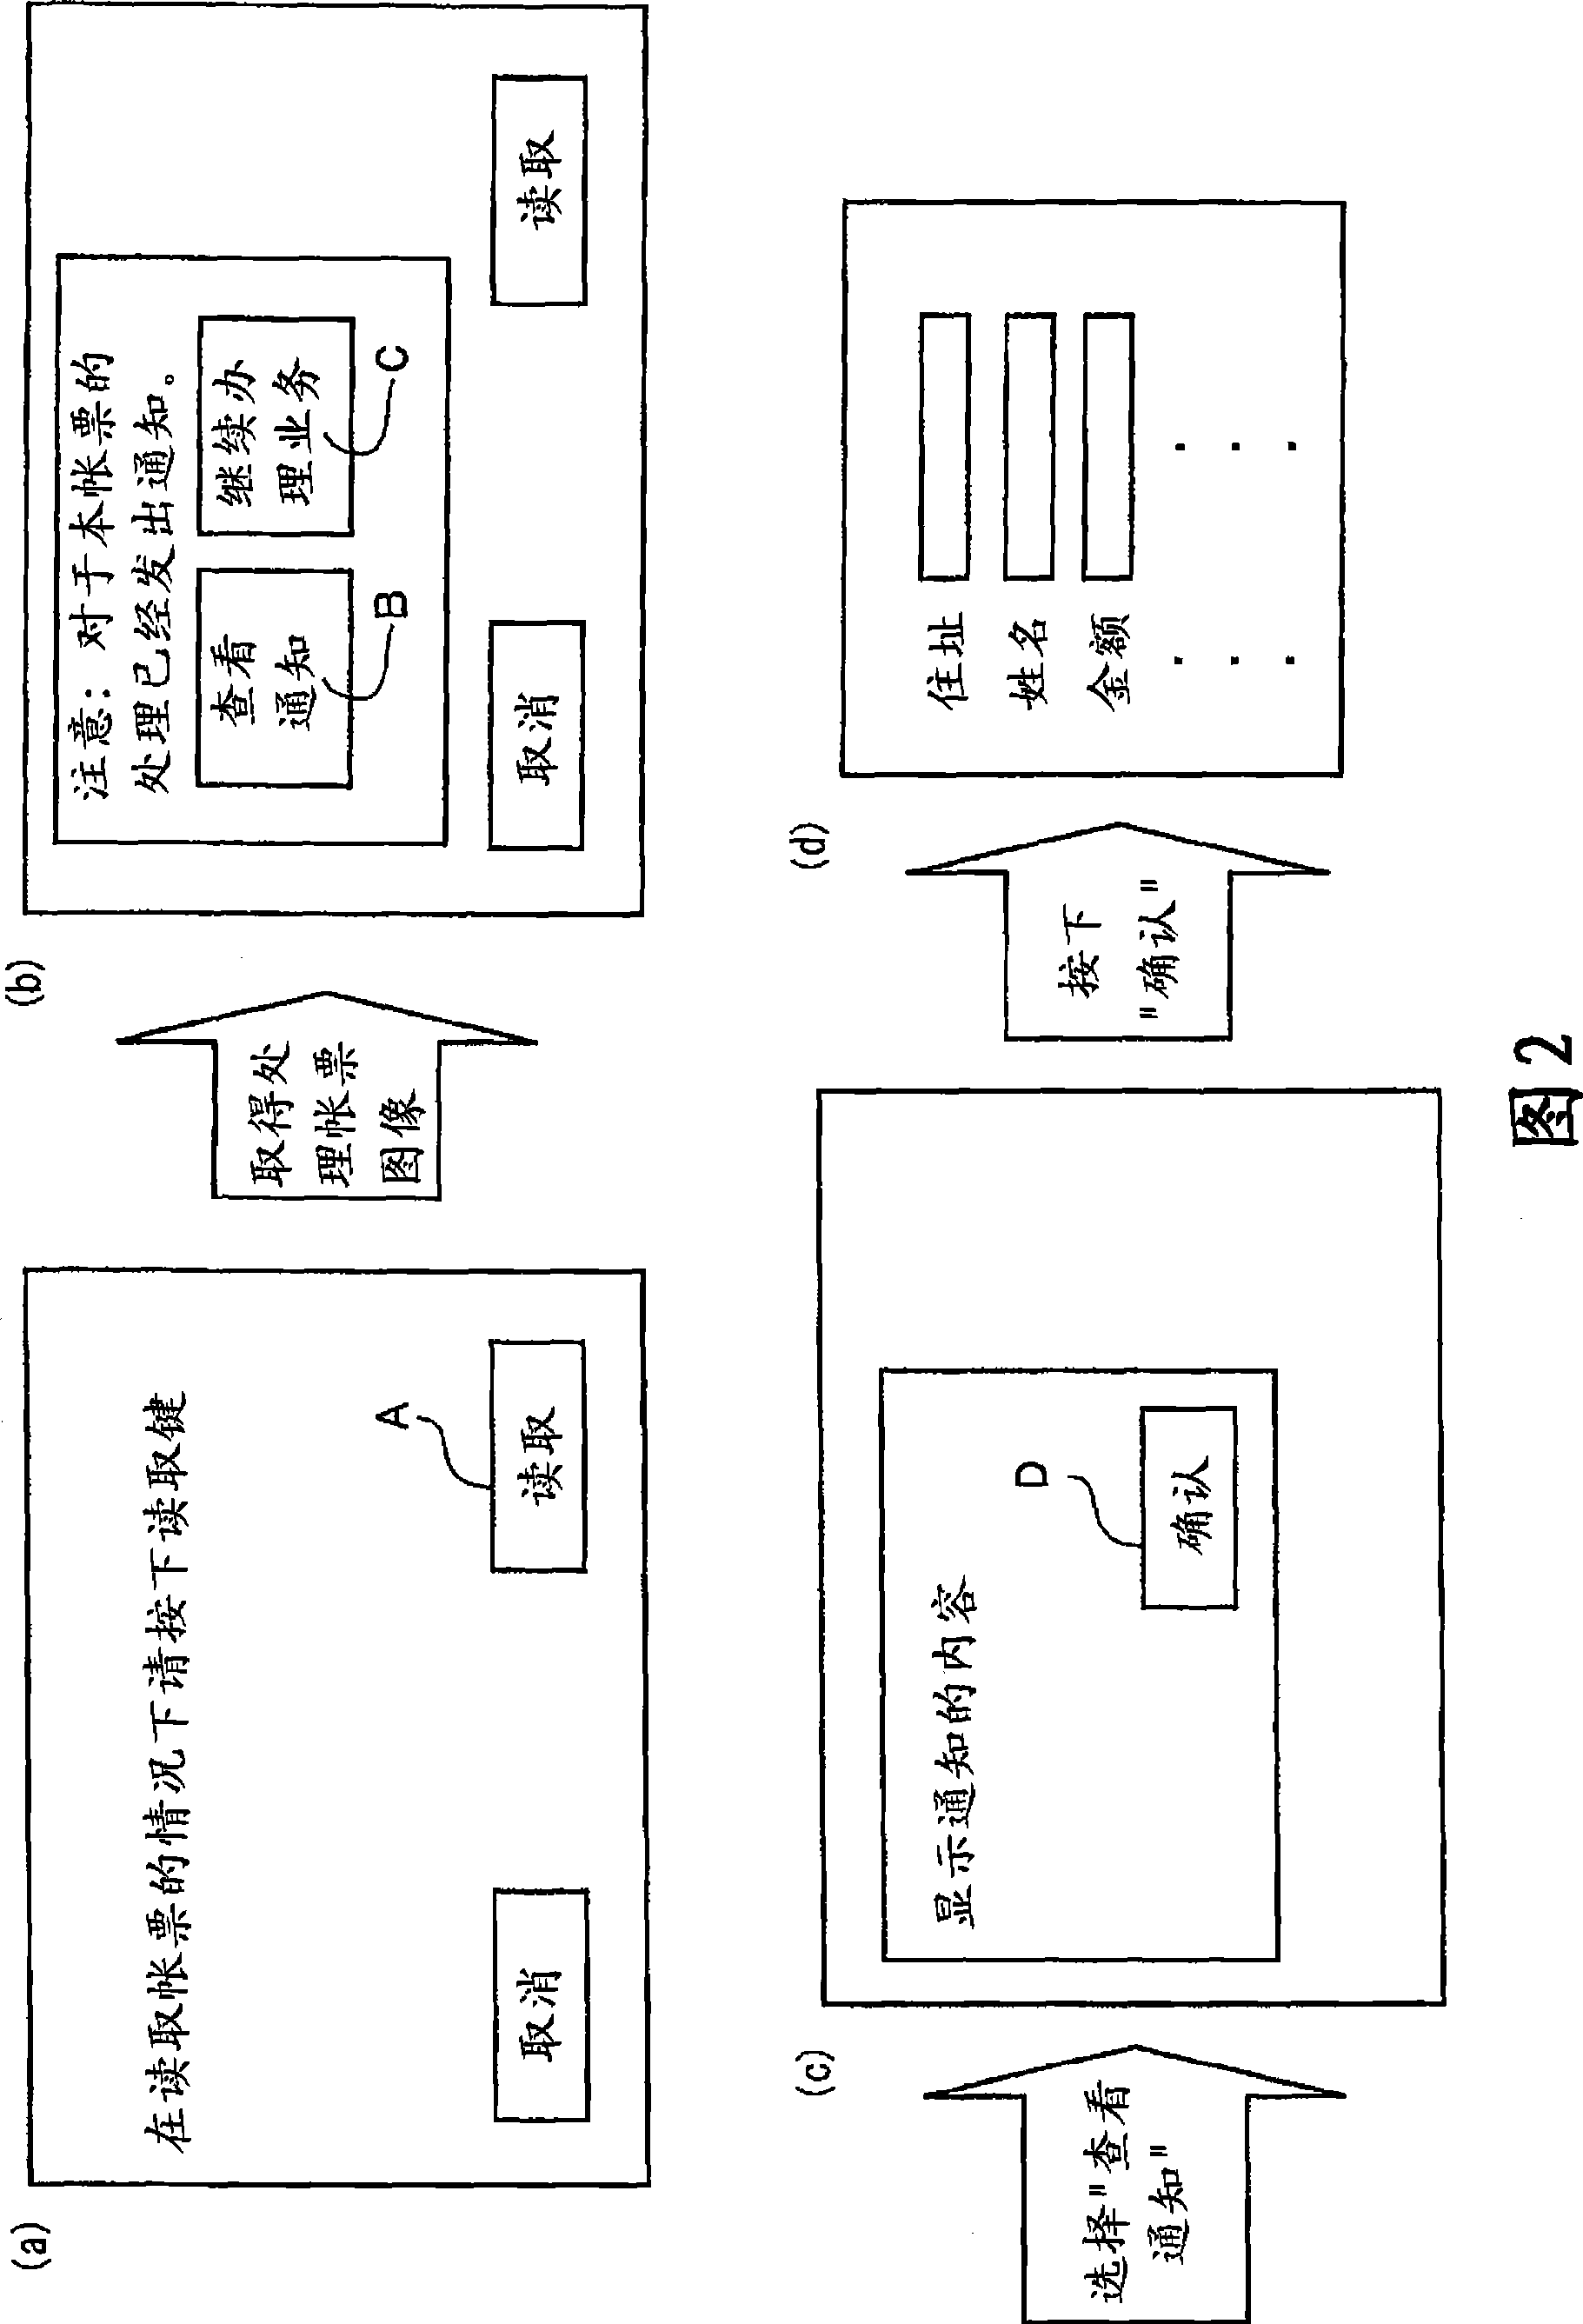 Banknote processing system